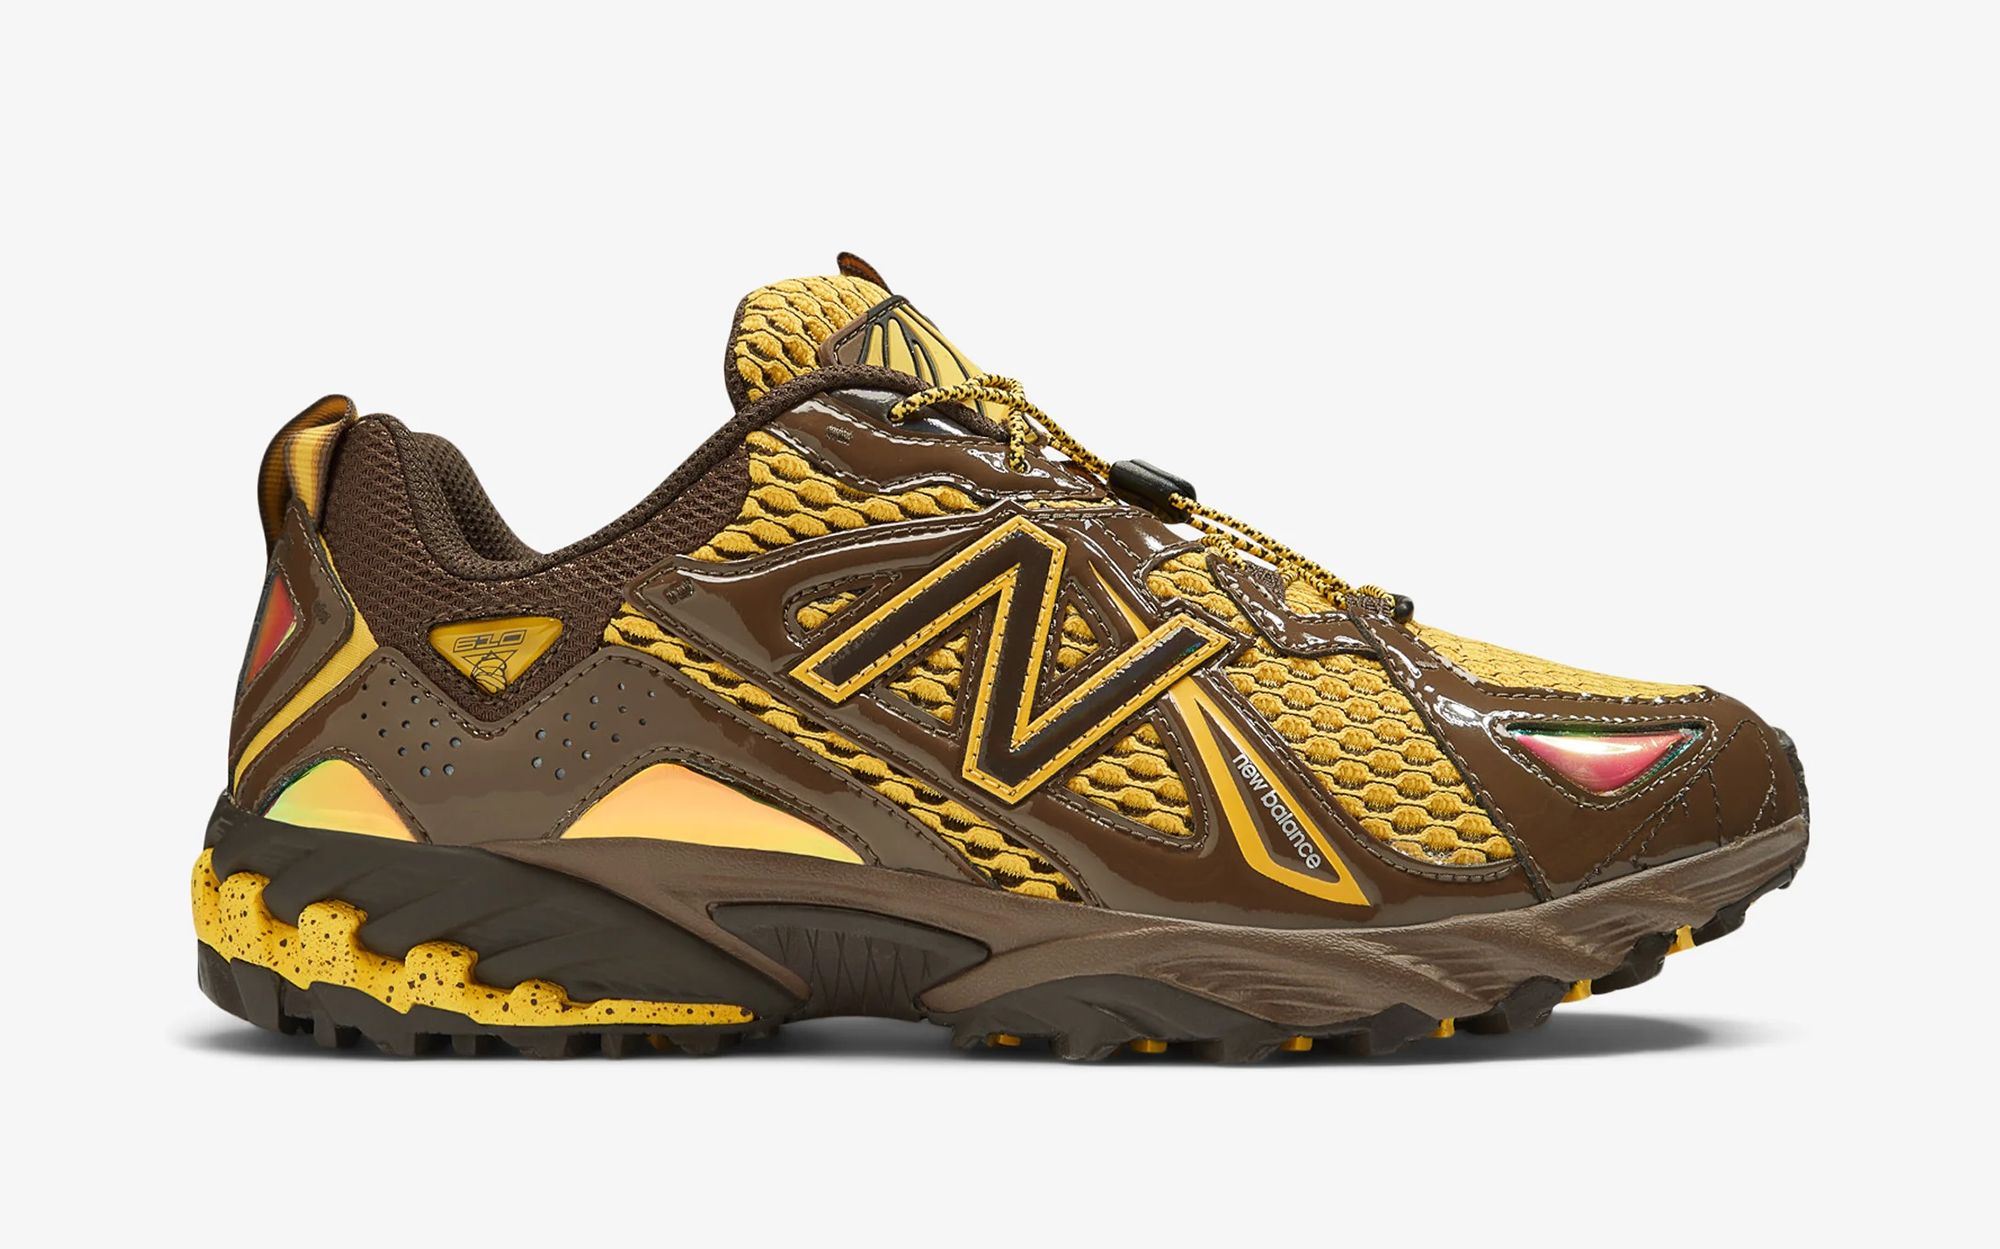 Where to Buy the Aminé x New Balance 610 